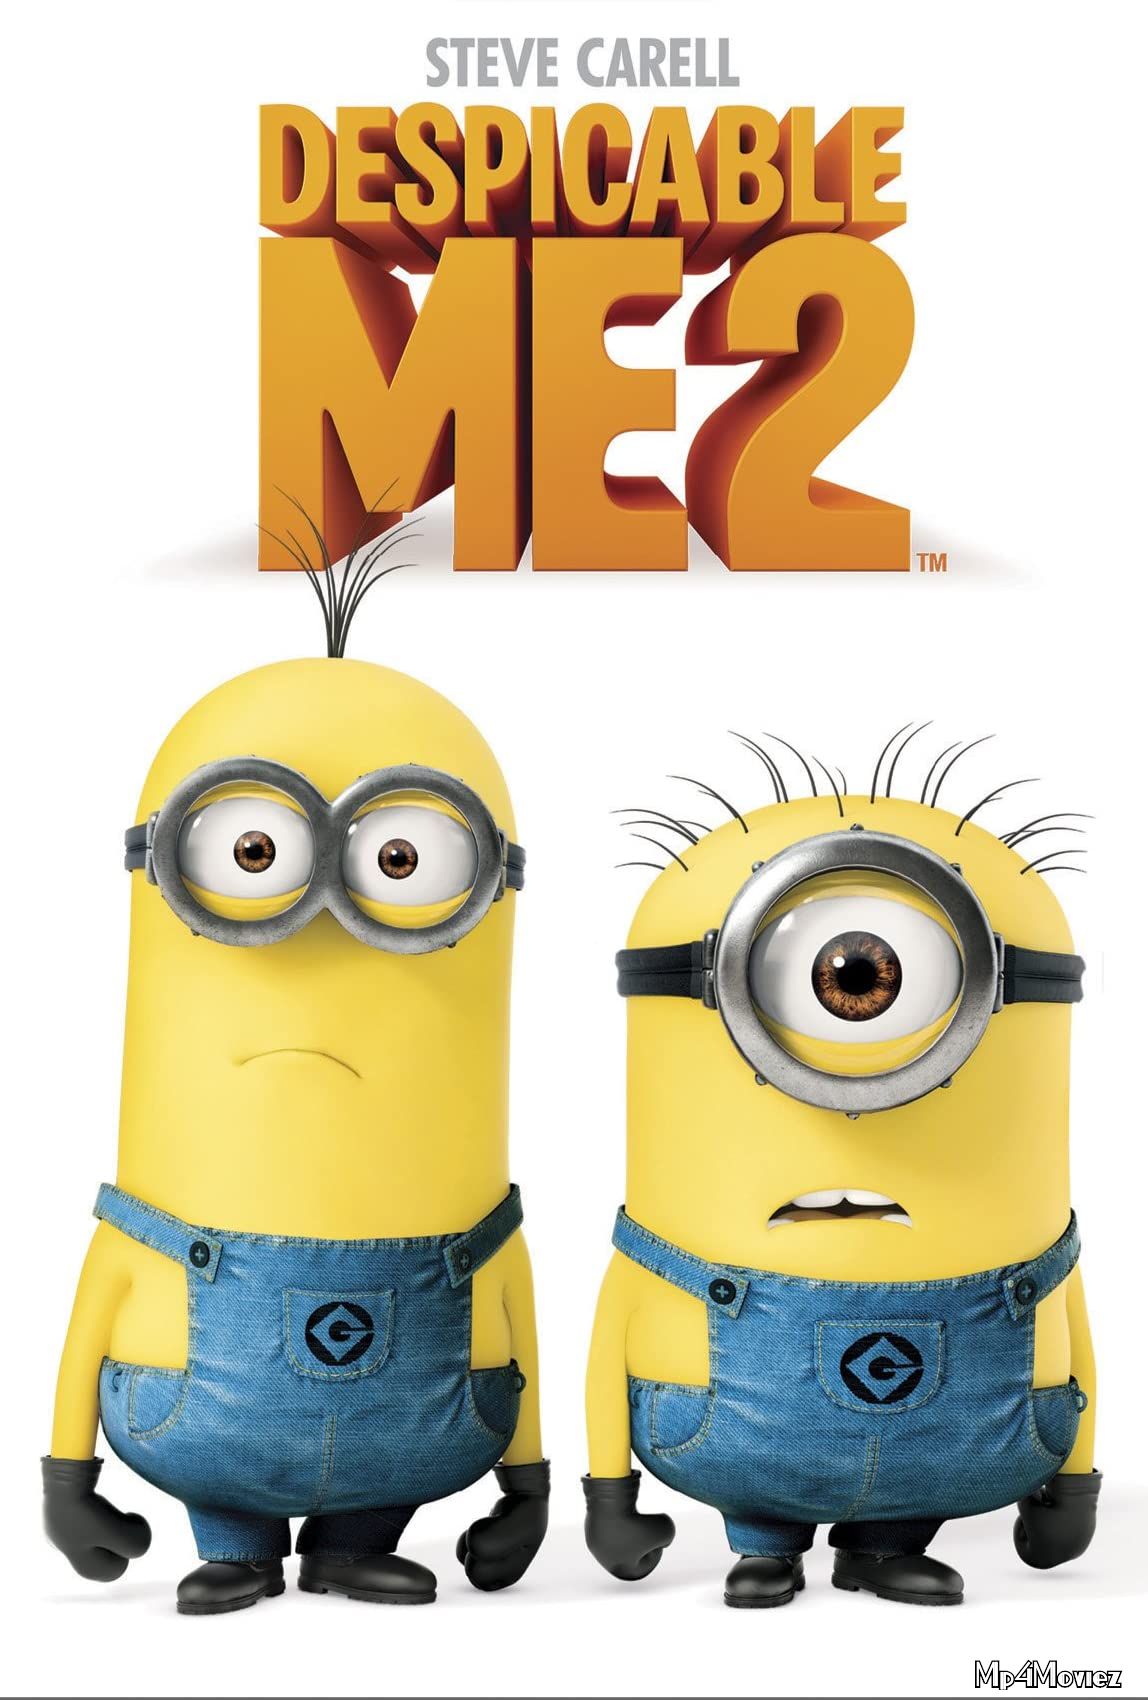 Despicable Me 2 (2013) Hindi Dubbed BRRip download full movie